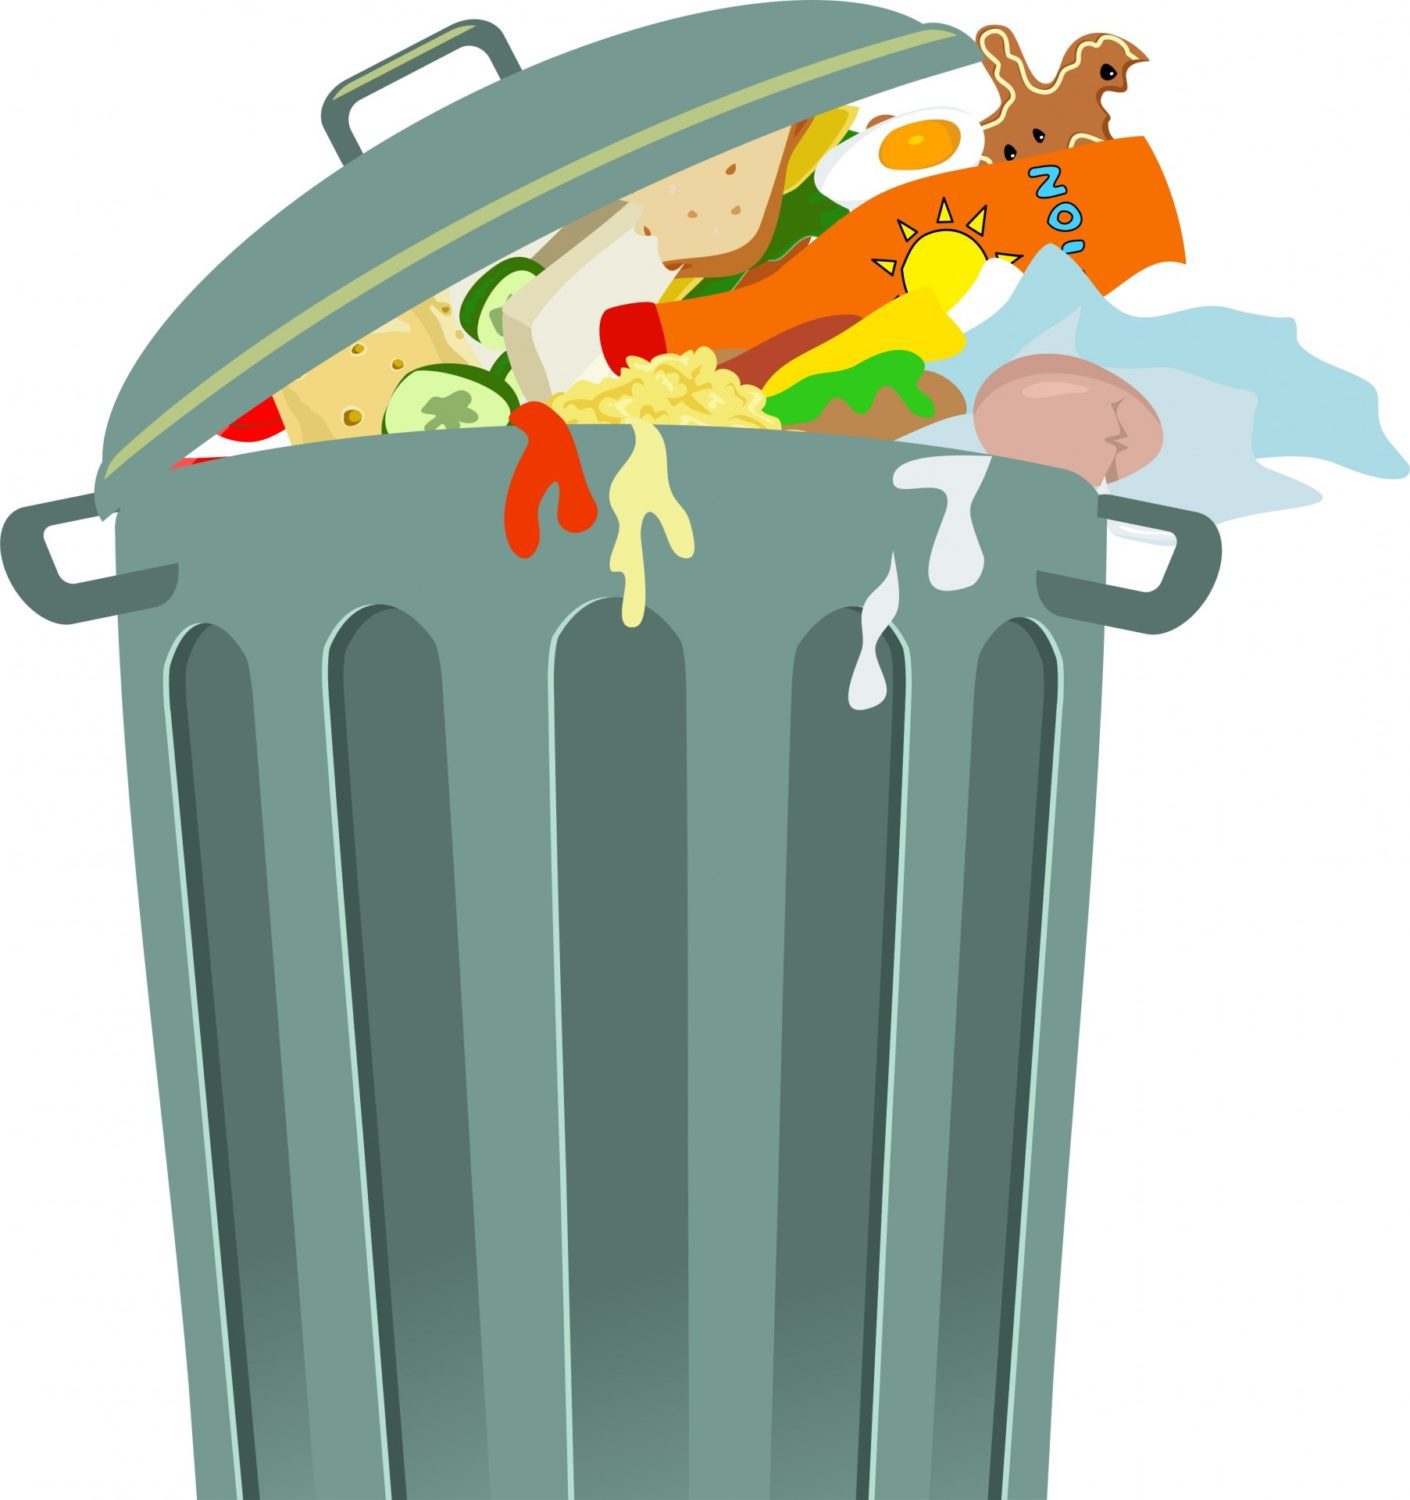 trash-can-clip-art-free-stock-photo-public-domain-pictures-within-garbage- can-clipart